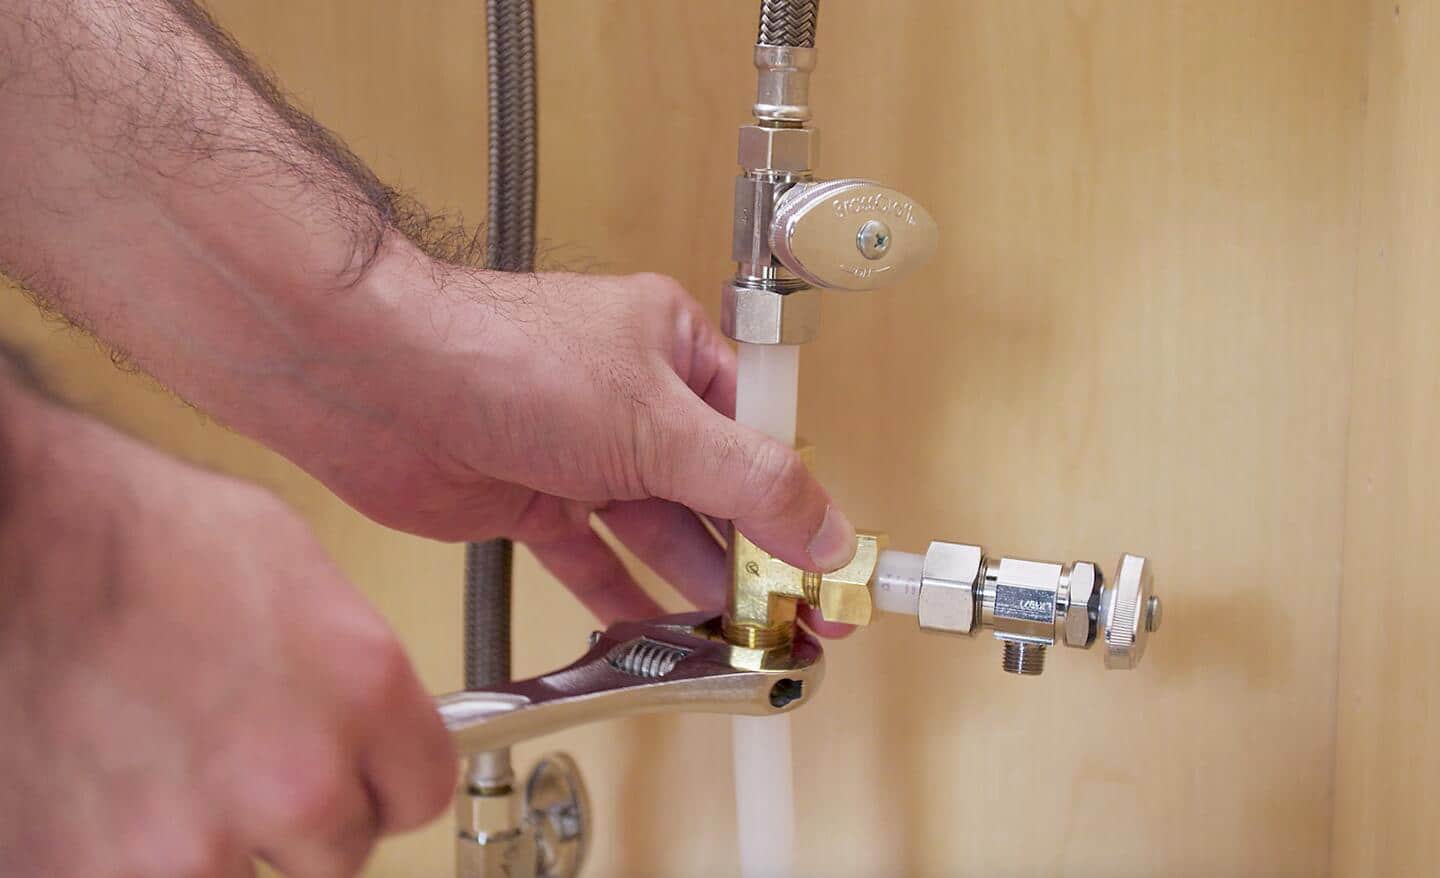 A person tapping a sink water supply to install a refrigerator water line.